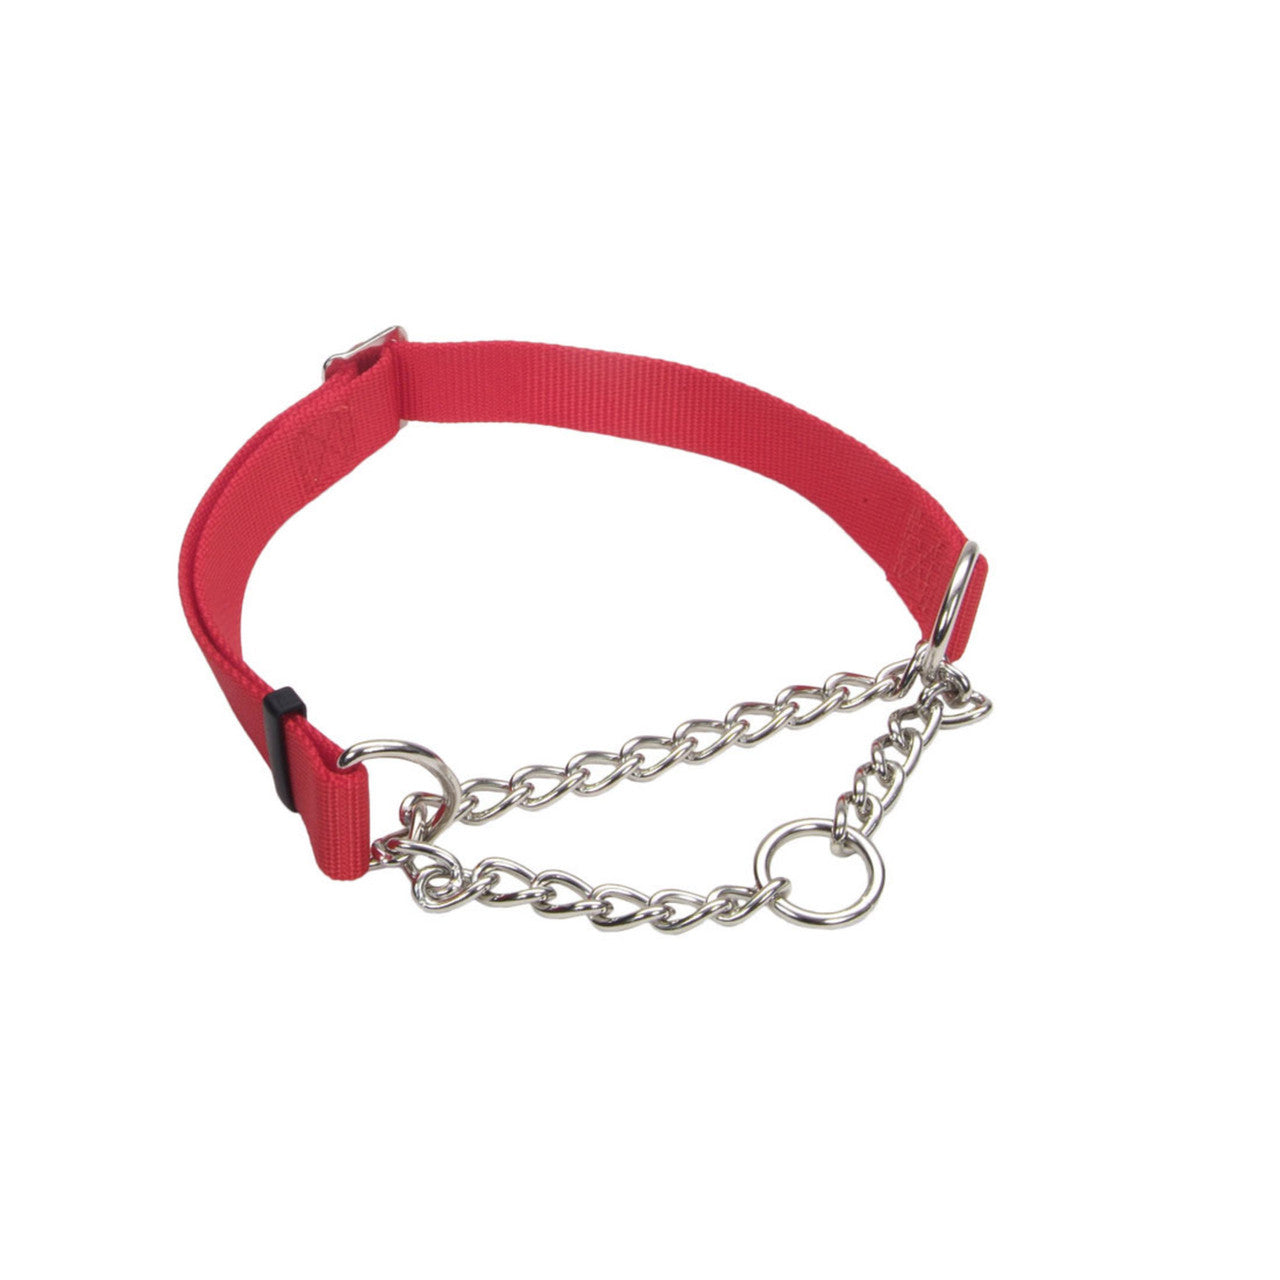 Check-Choke Adjustable Check Training Dog Collar Red 3/4 in x 14-20 in